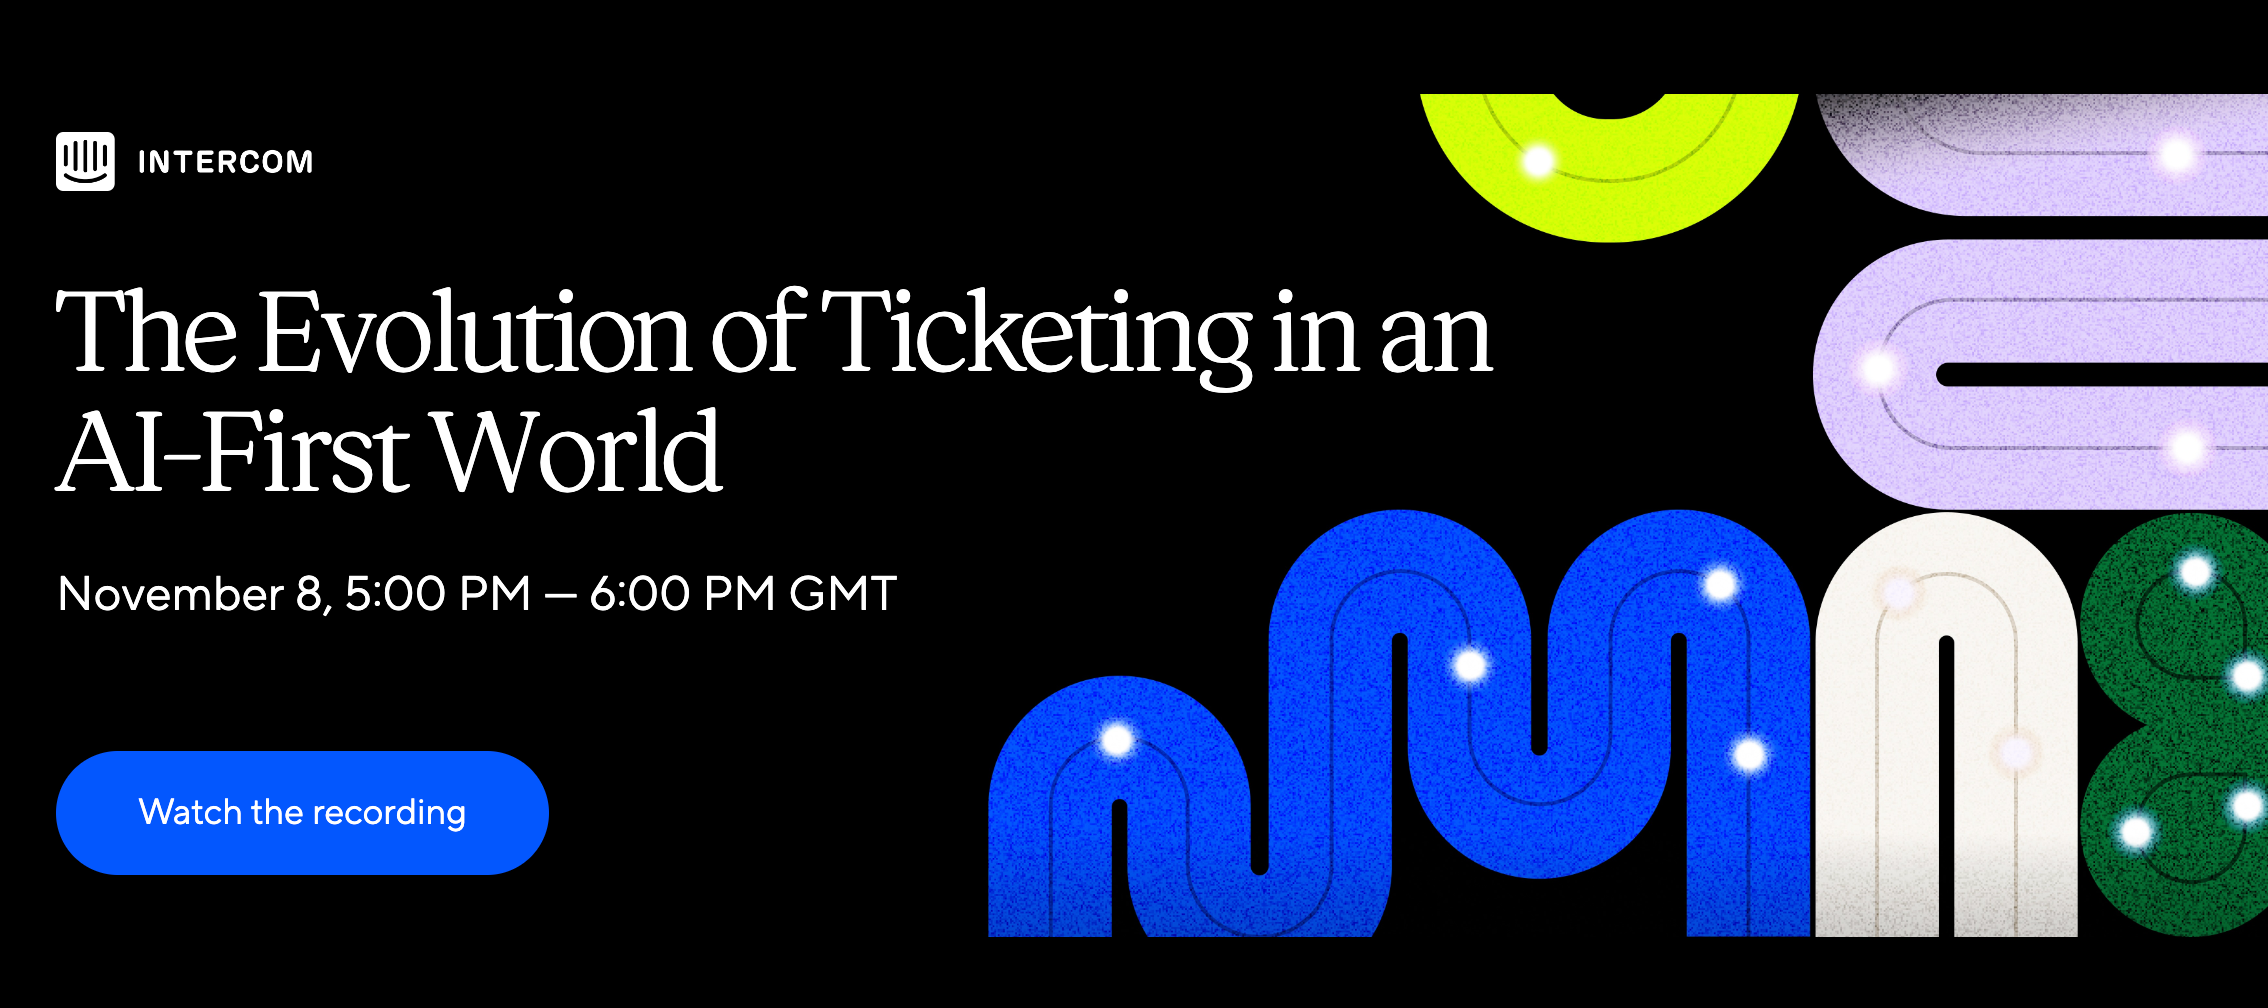 The Evolution of Ticketing in an AI-First World